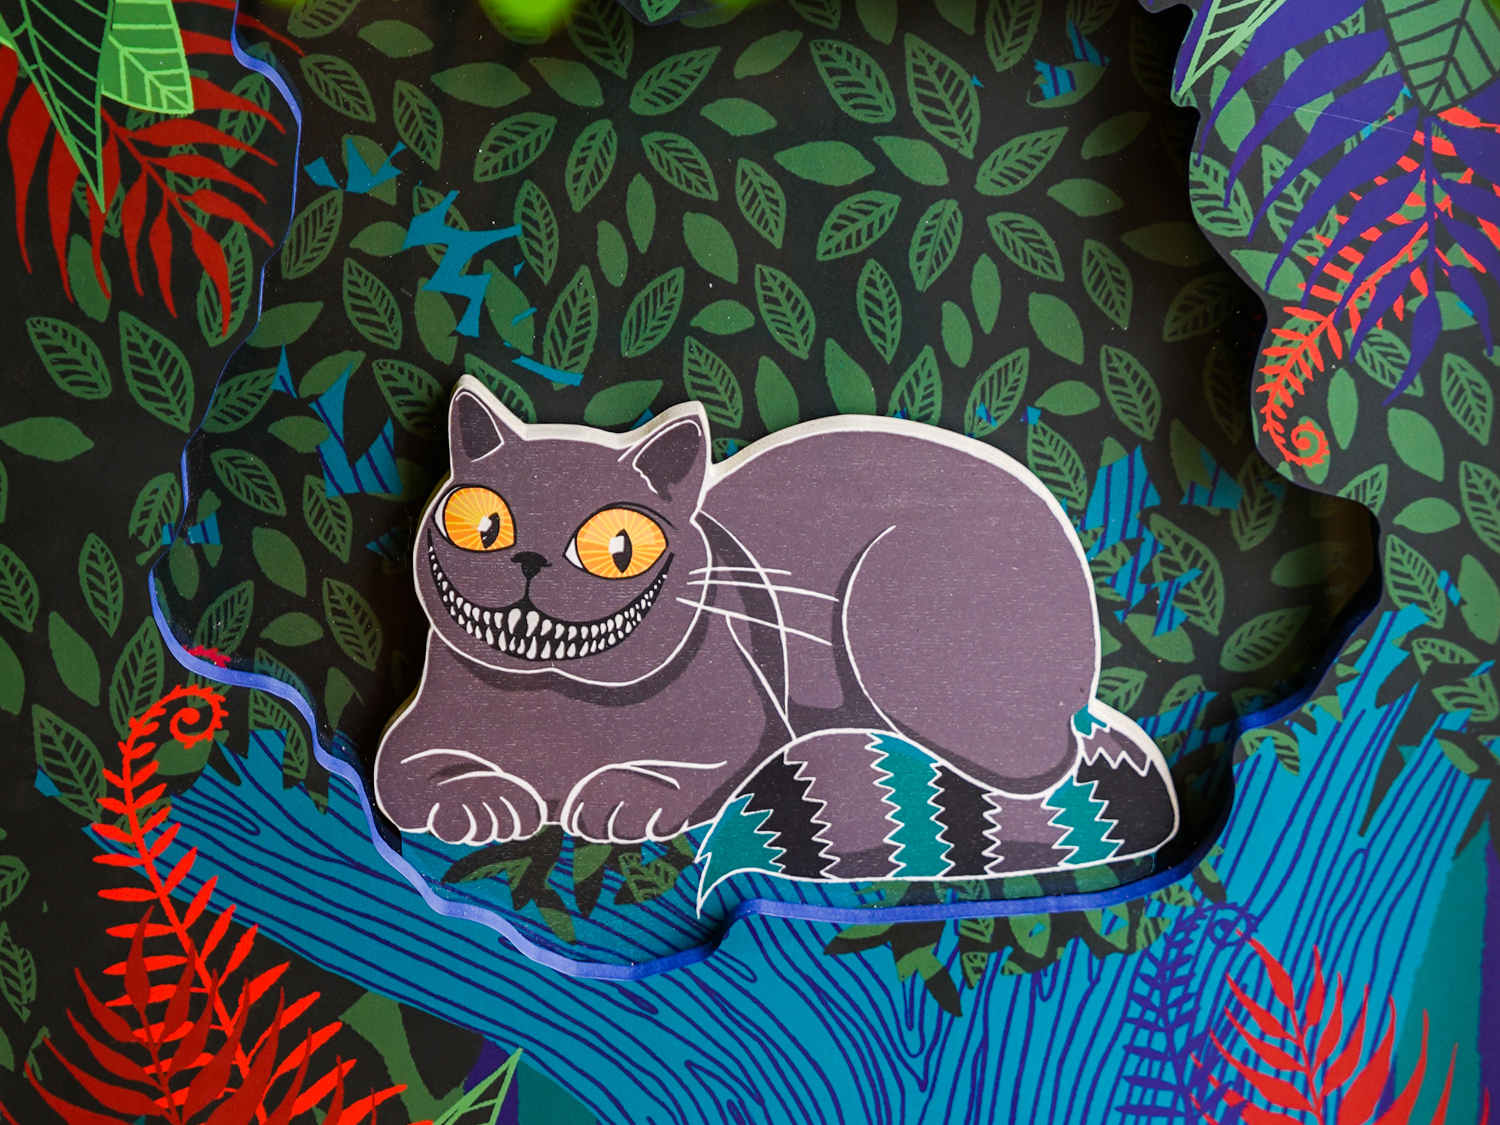 “Enchanted Journeys” features a cat from “Alice’s Adventures in Wonderland.”